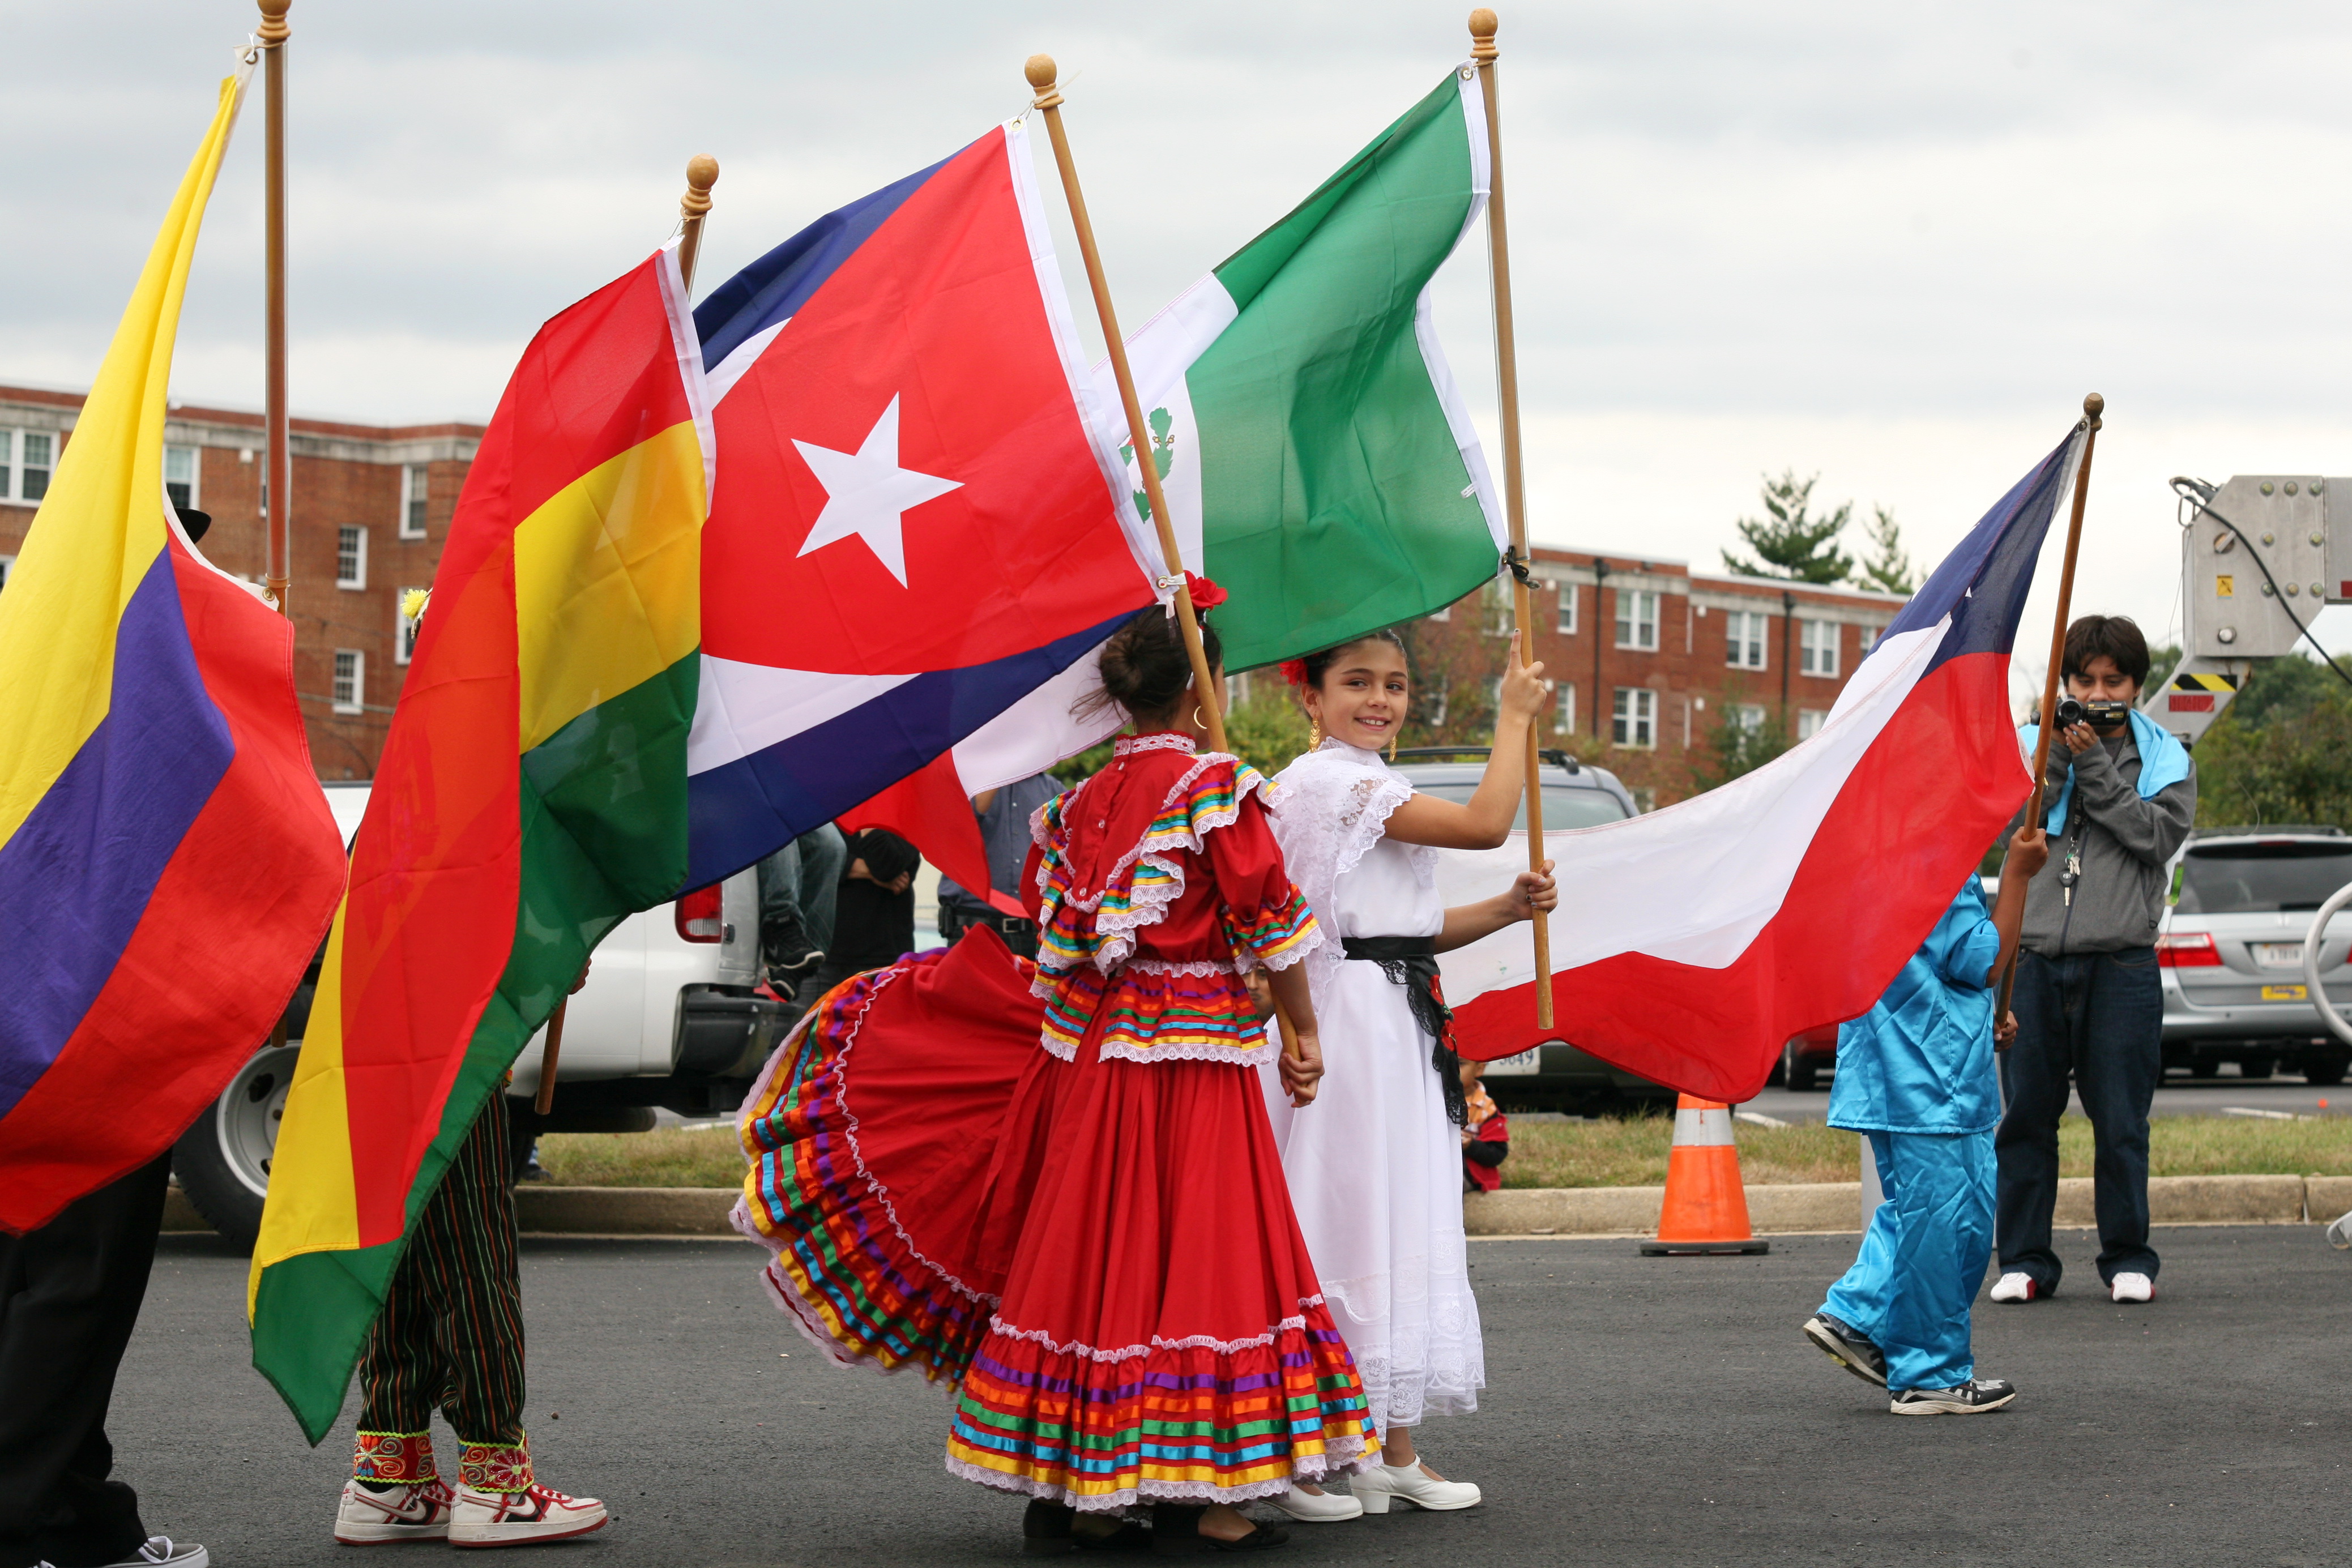 As Latinx Heritage Month comes to a close, we need to debunk some myths about Latinx communities